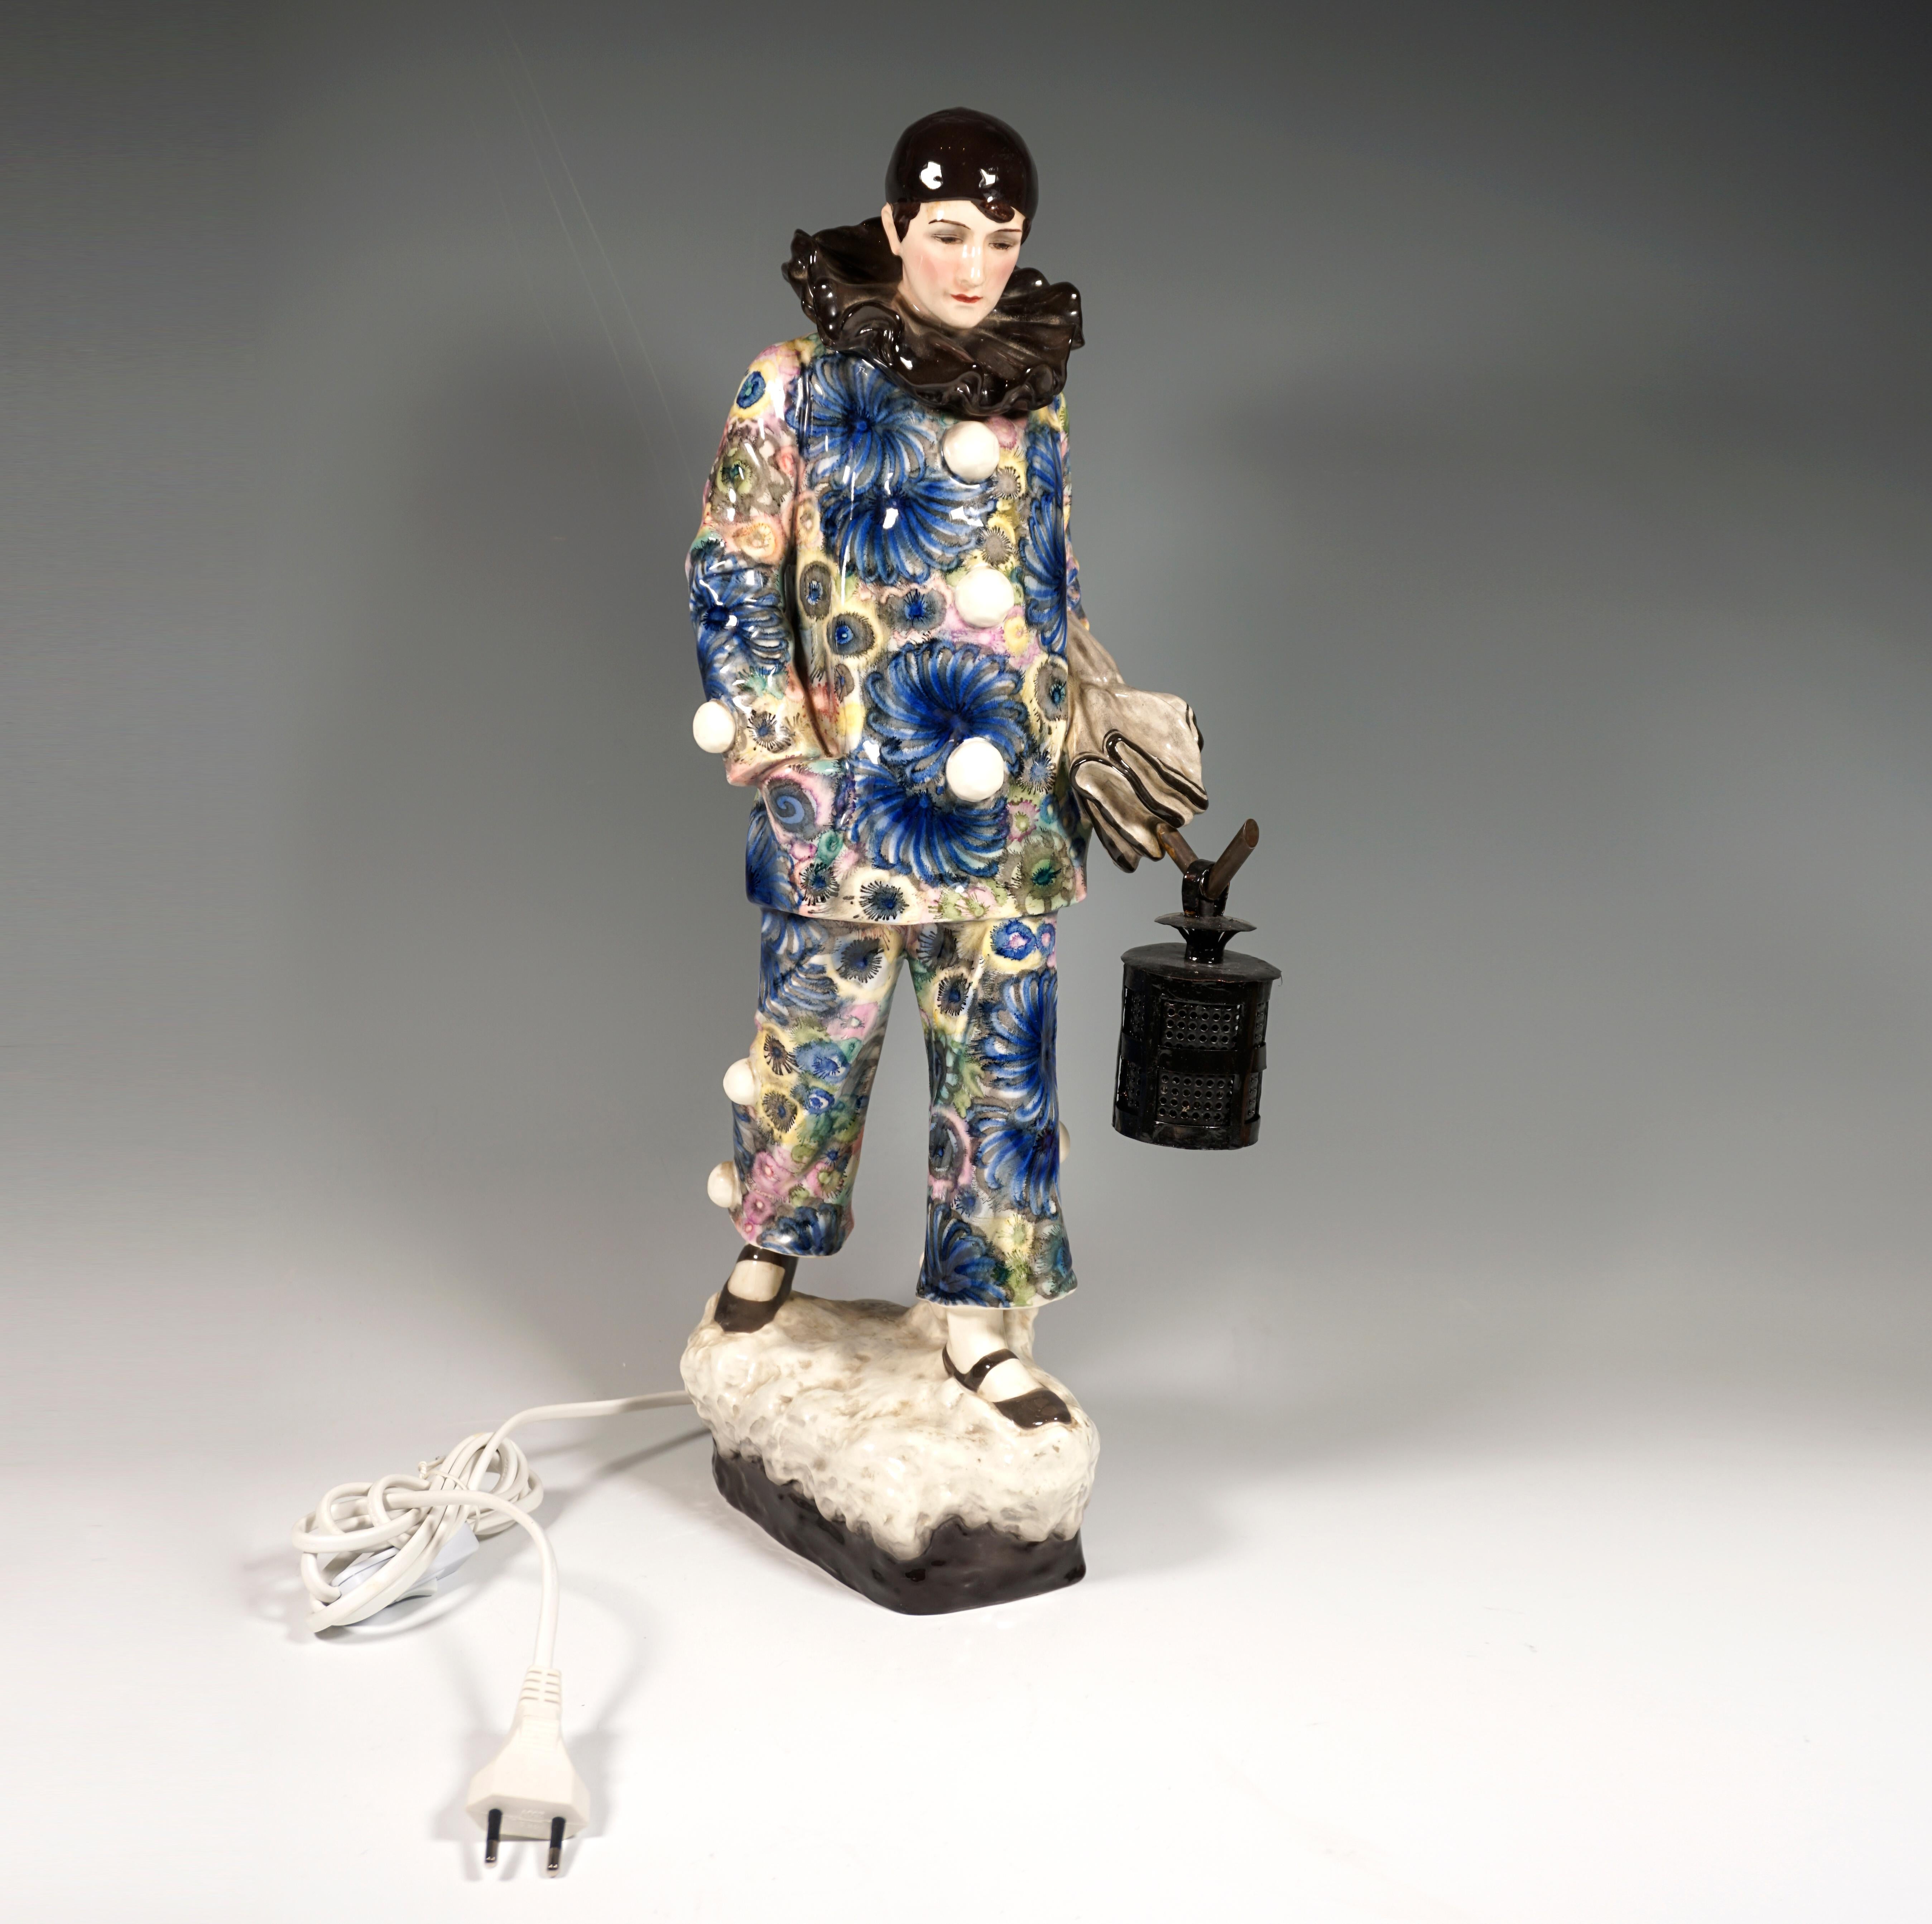 Exceptional goldscheider figurine with lamp of the 1920s:
A harlequin lost in thought is depicted in a costume elaborately decorated with a fine floral pattern in shades of blue and yellow. His cap, the ruff and the strap shoes are kept in dark